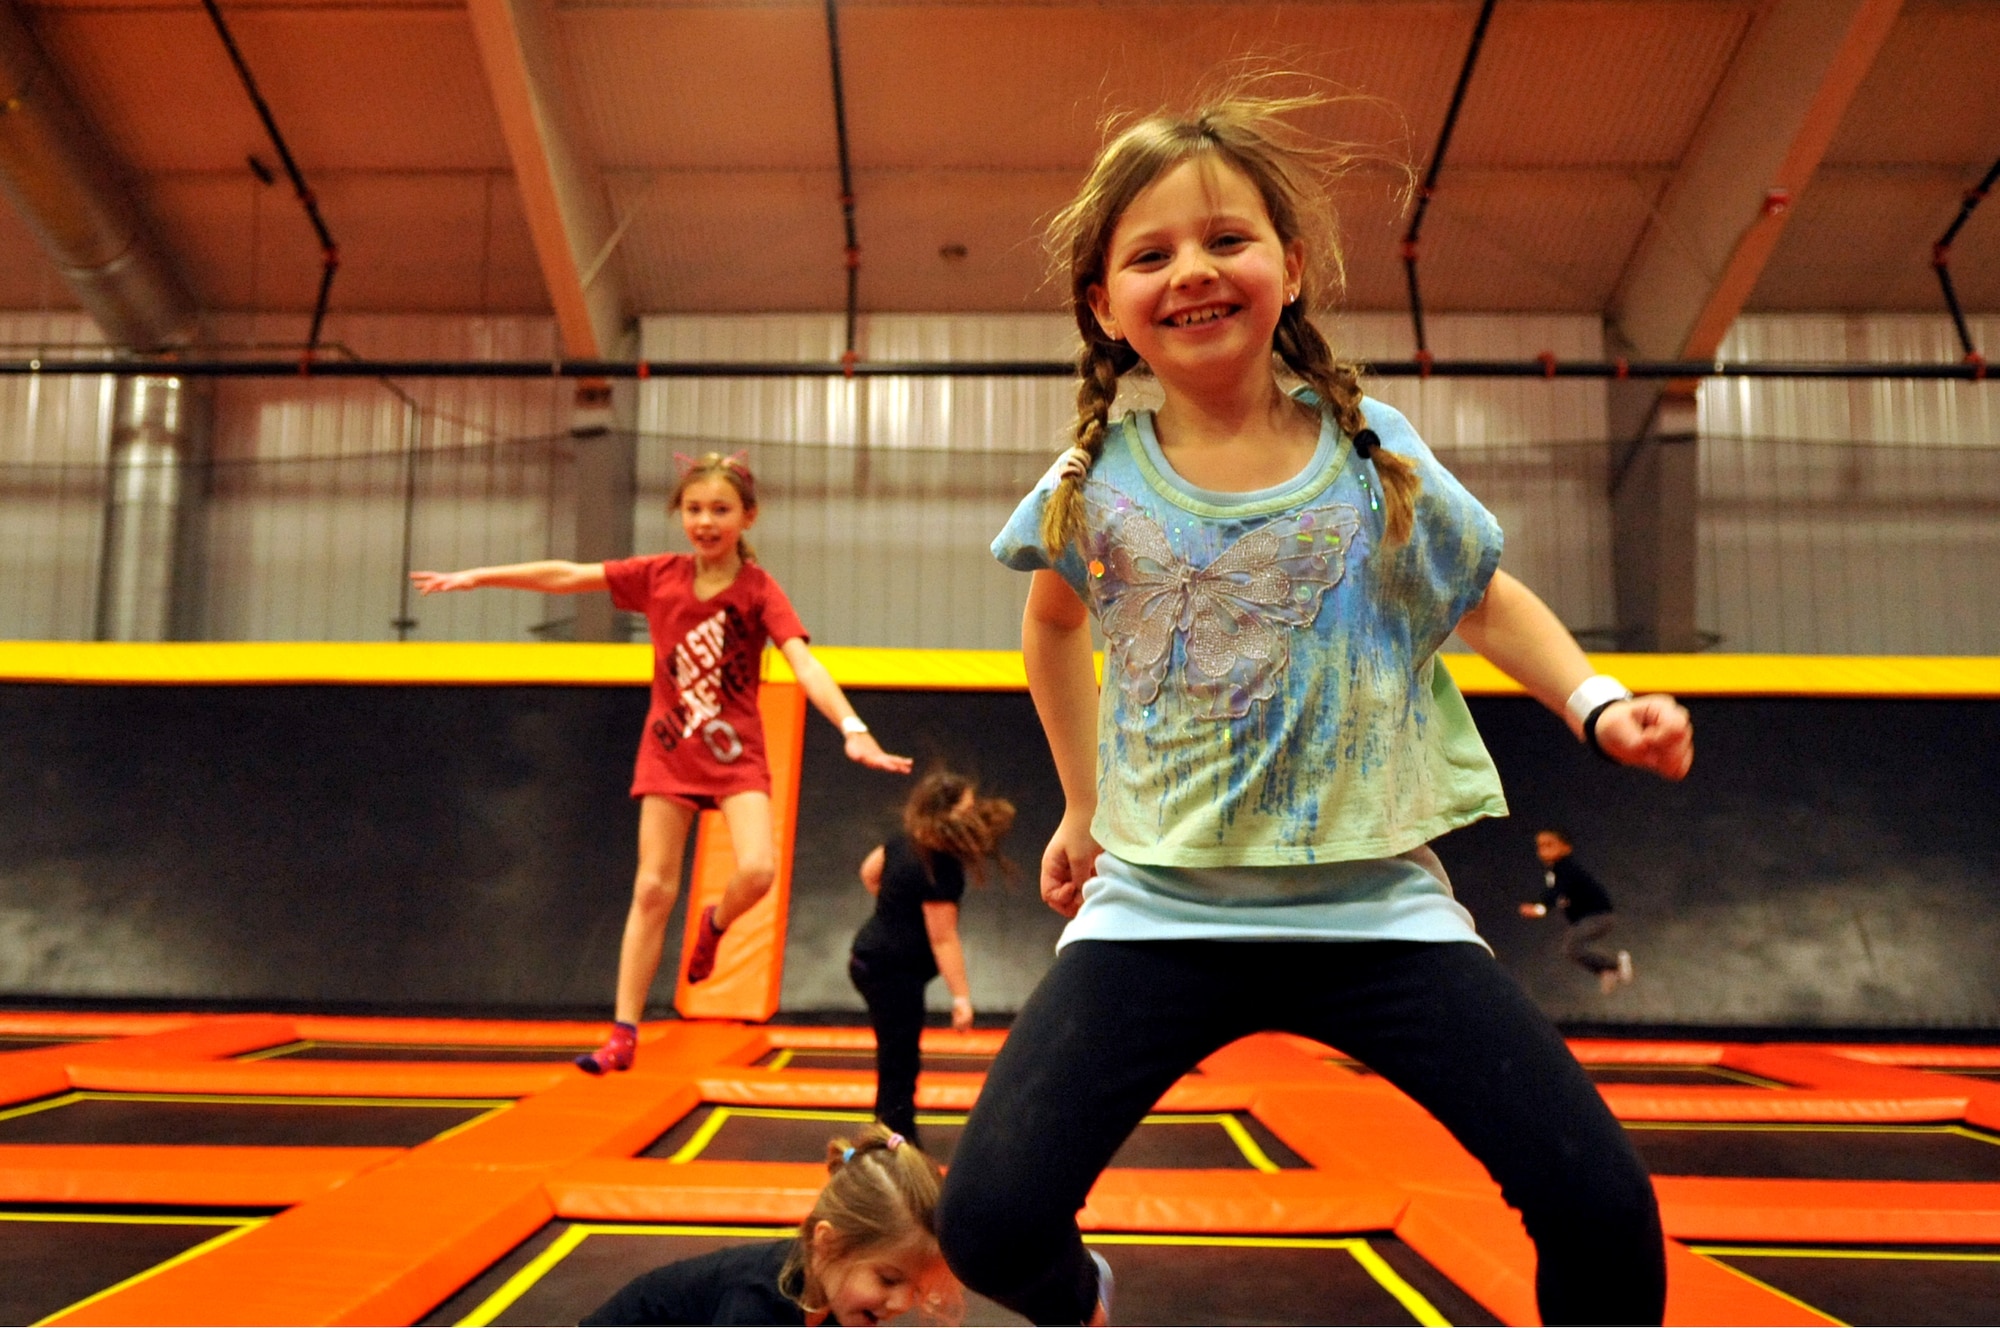 Leah Davis, 7, and more children from Grand Forks Air Force Base, N.D., jump on trampolines at Northern Air Family Fun Center in Grand Forks, Feb. 2, 2015. Service members and children from the base were invited to take part in a military appreciation night event featuring a trampoline park, laser tag, and free pizza and ice cream. (U.S. Air Force photo/Staff Sgt. Susan L. Davis)